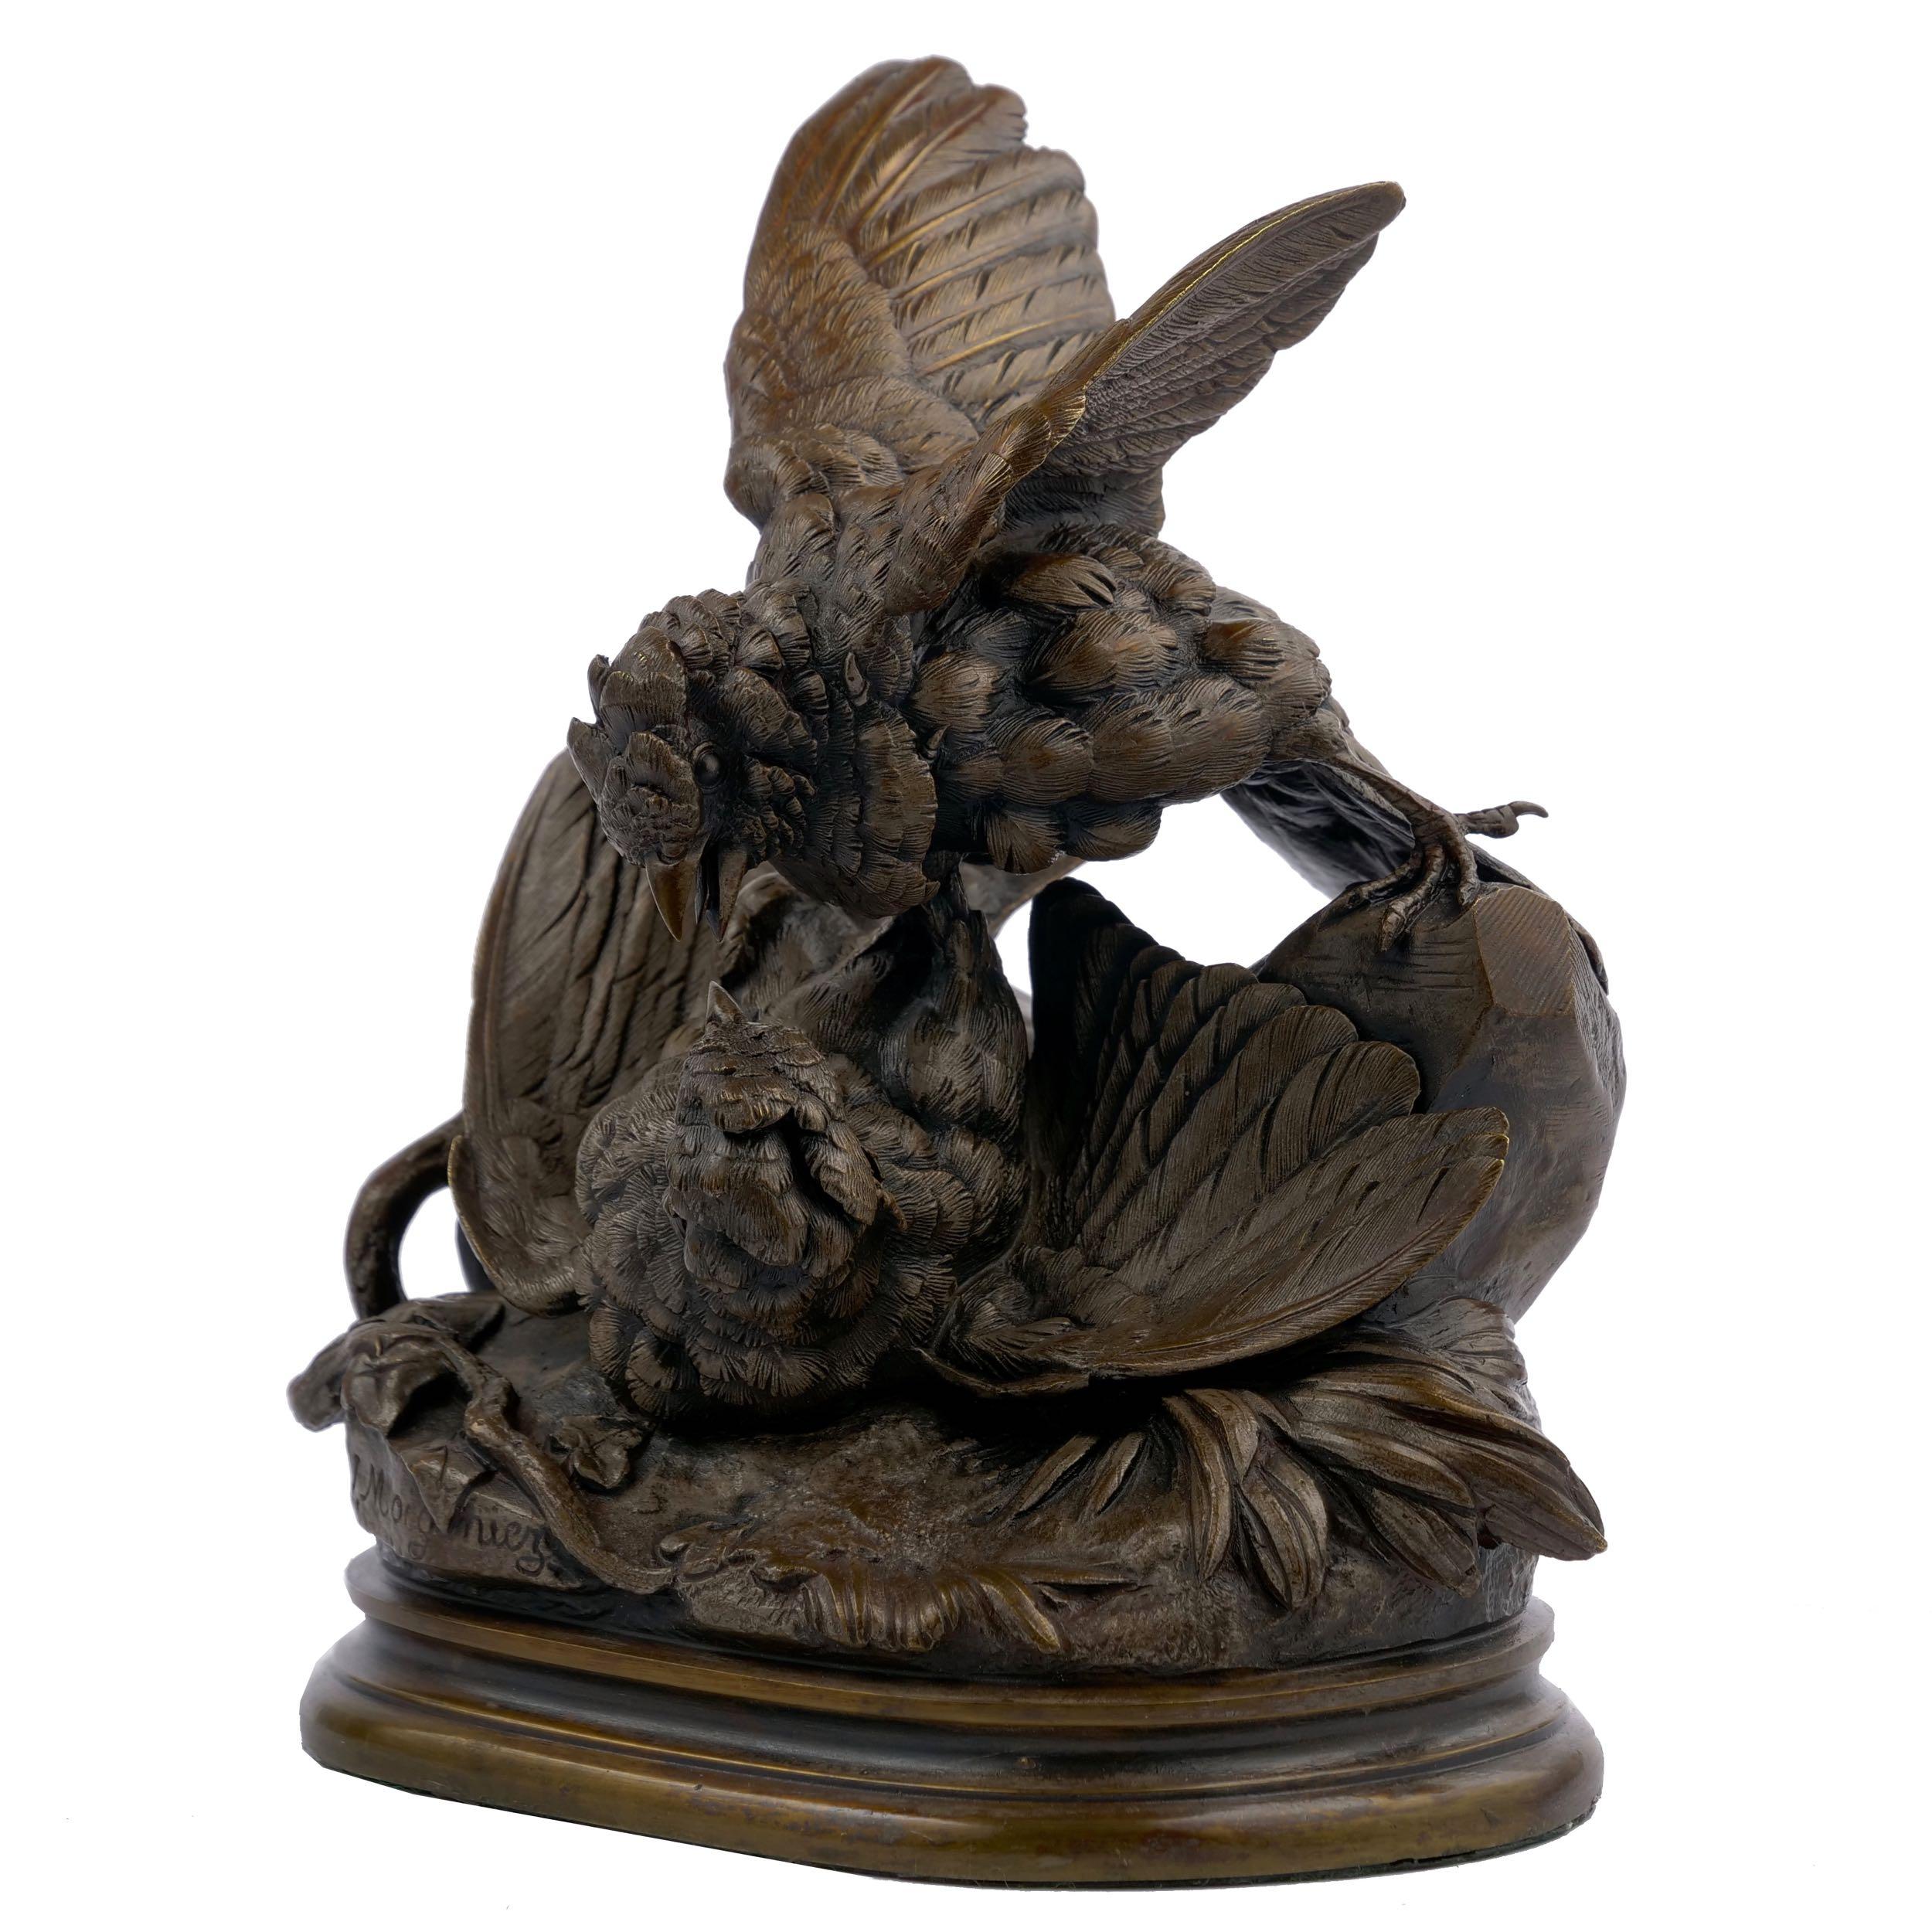 This exceedingly fine sculpture depicting a pair of fighting sparrows was originally conceived for exhibition at the Paris Salon of 1867, the present model cast during the fourth quarter of the 19th century. A work that showcases Moigniez's superior